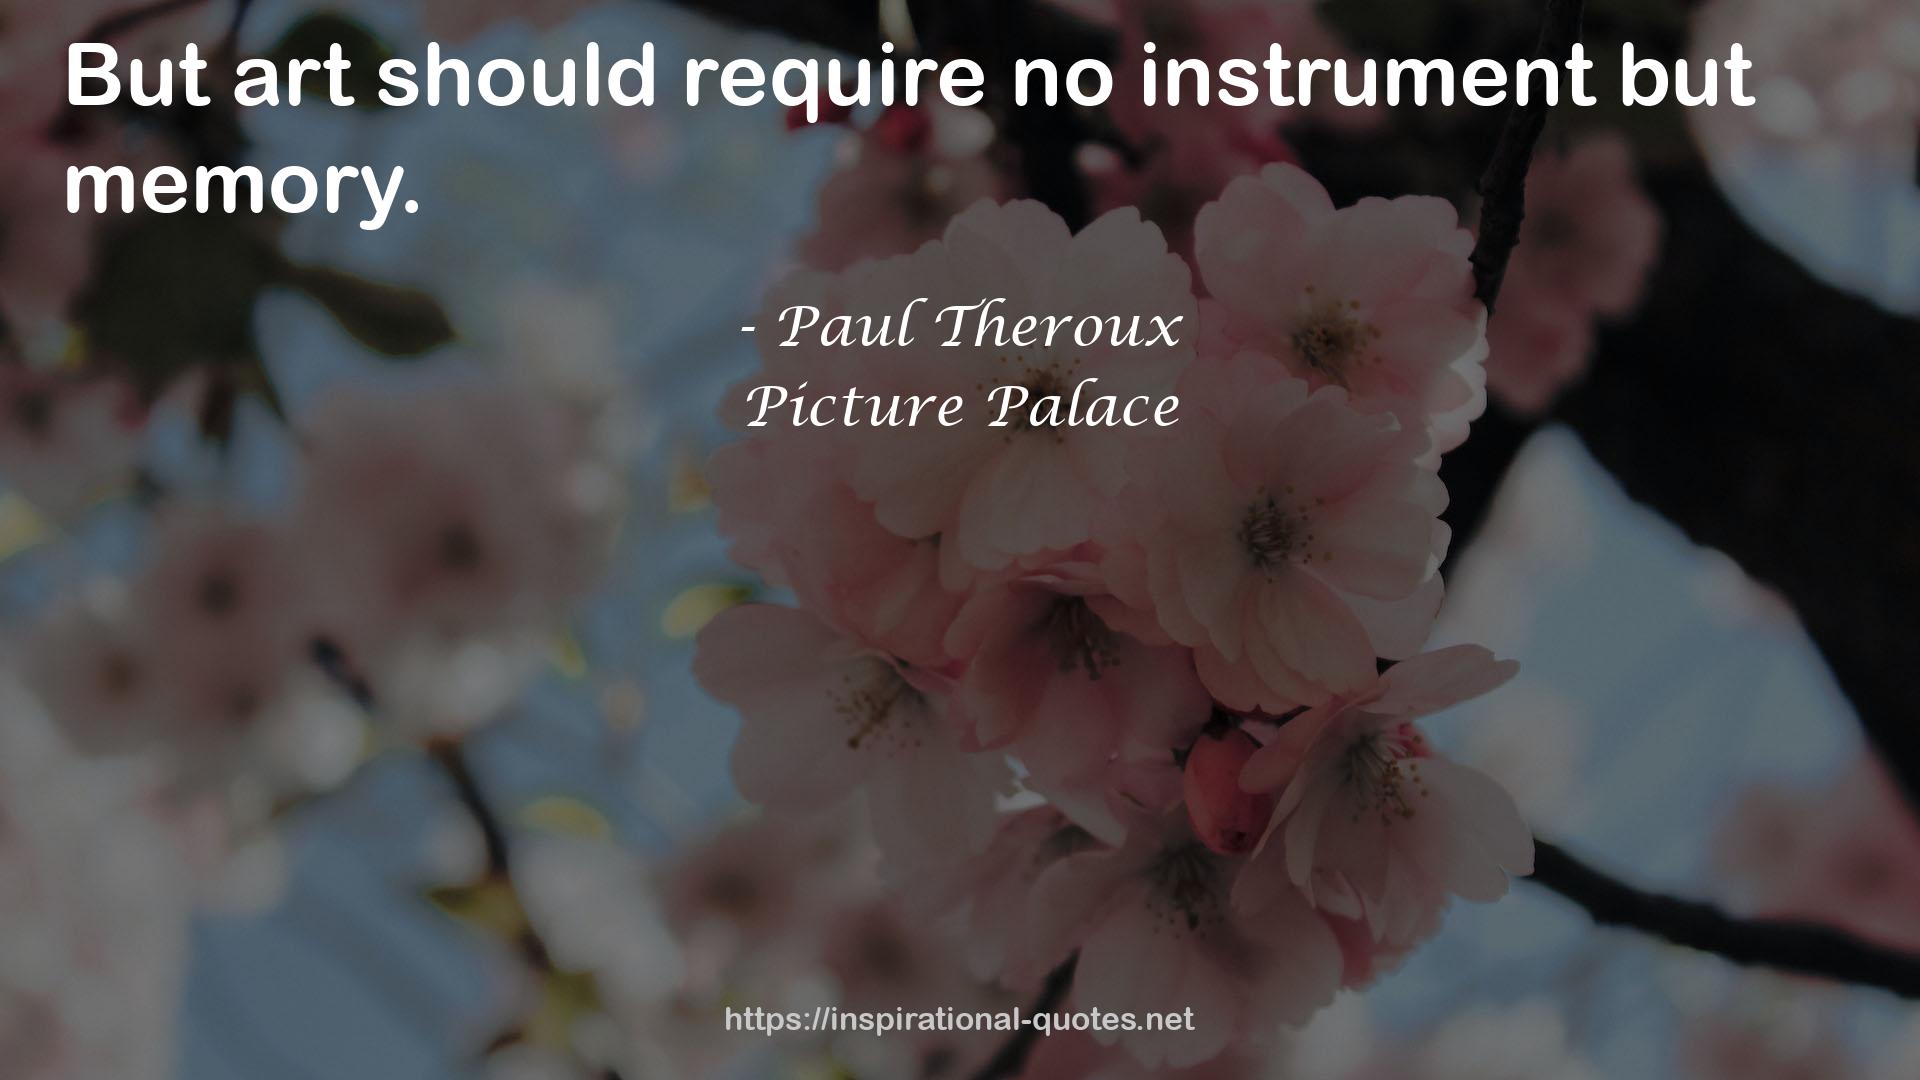 Picture Palace QUOTES